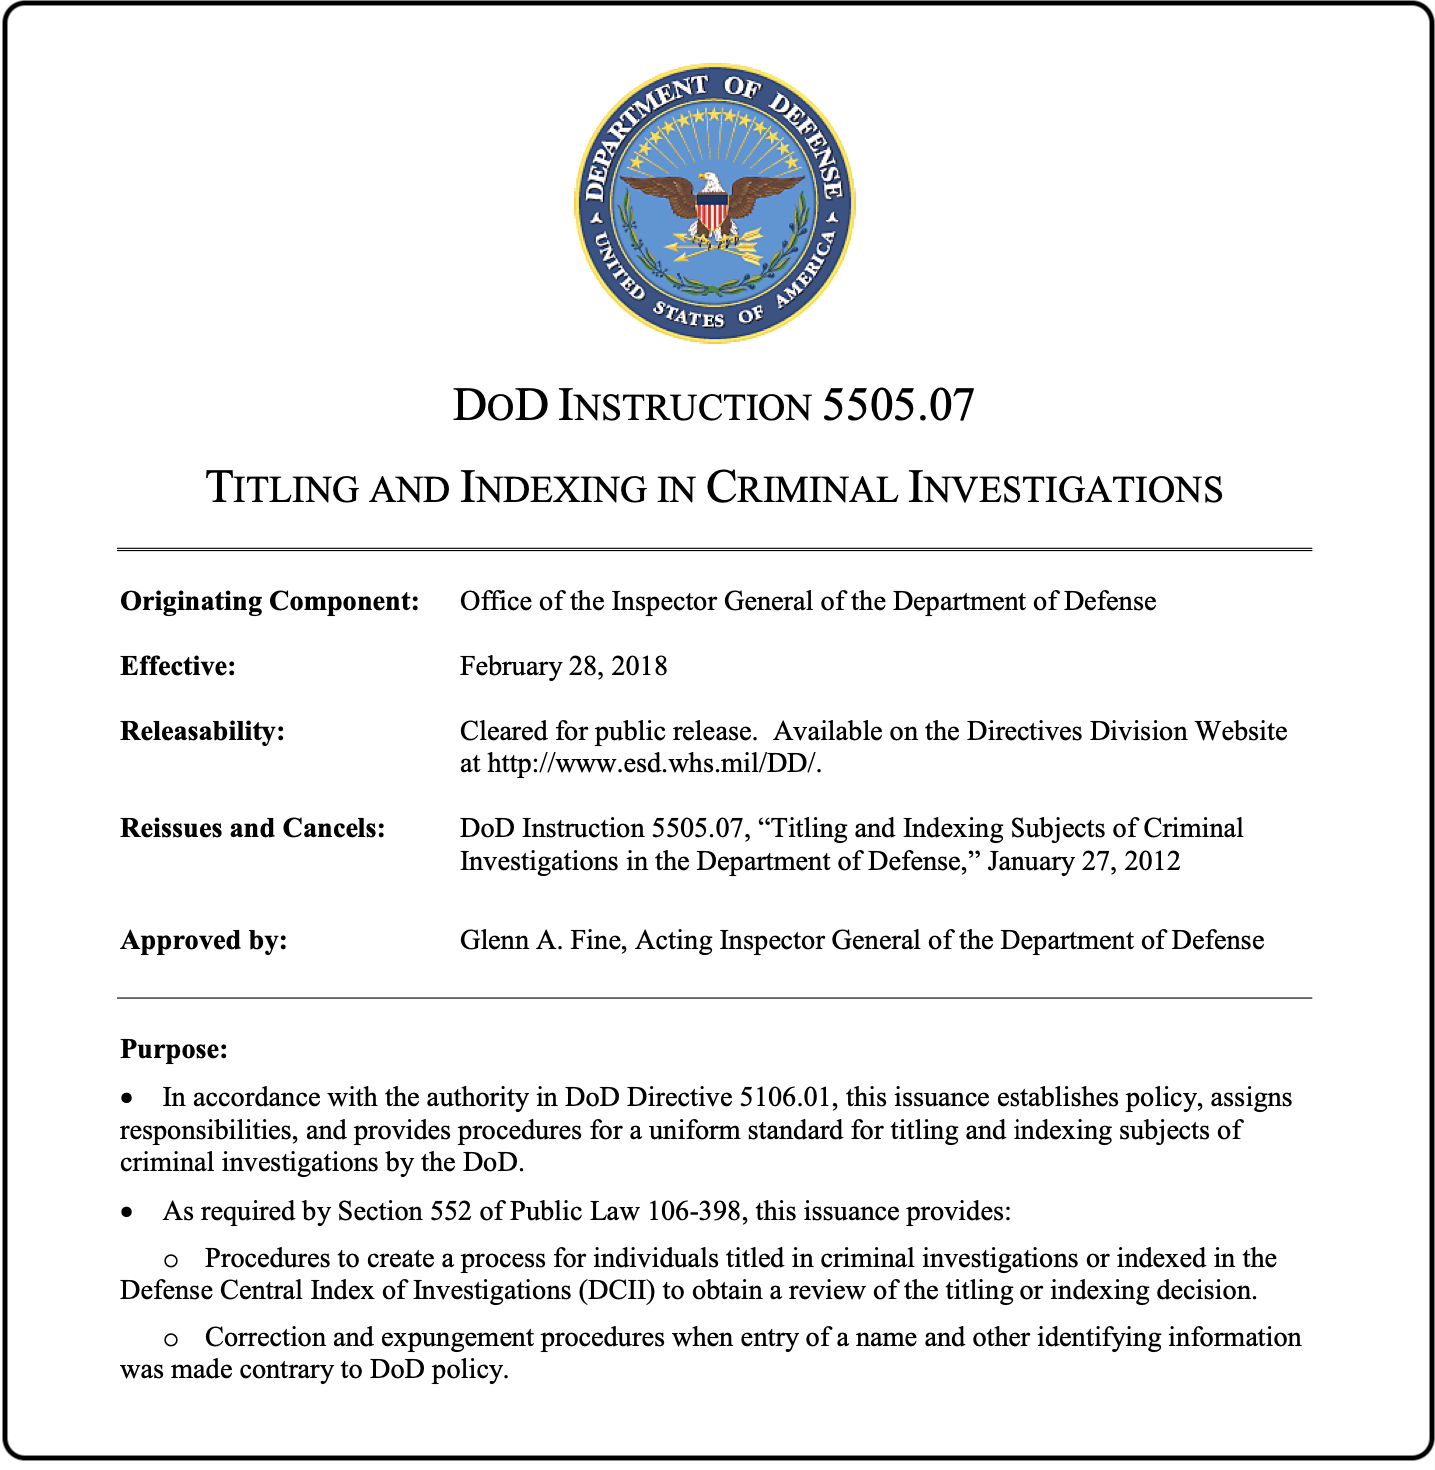 DoD Instruction 5505.07 - Titling and Indexing in Criminal Investigations